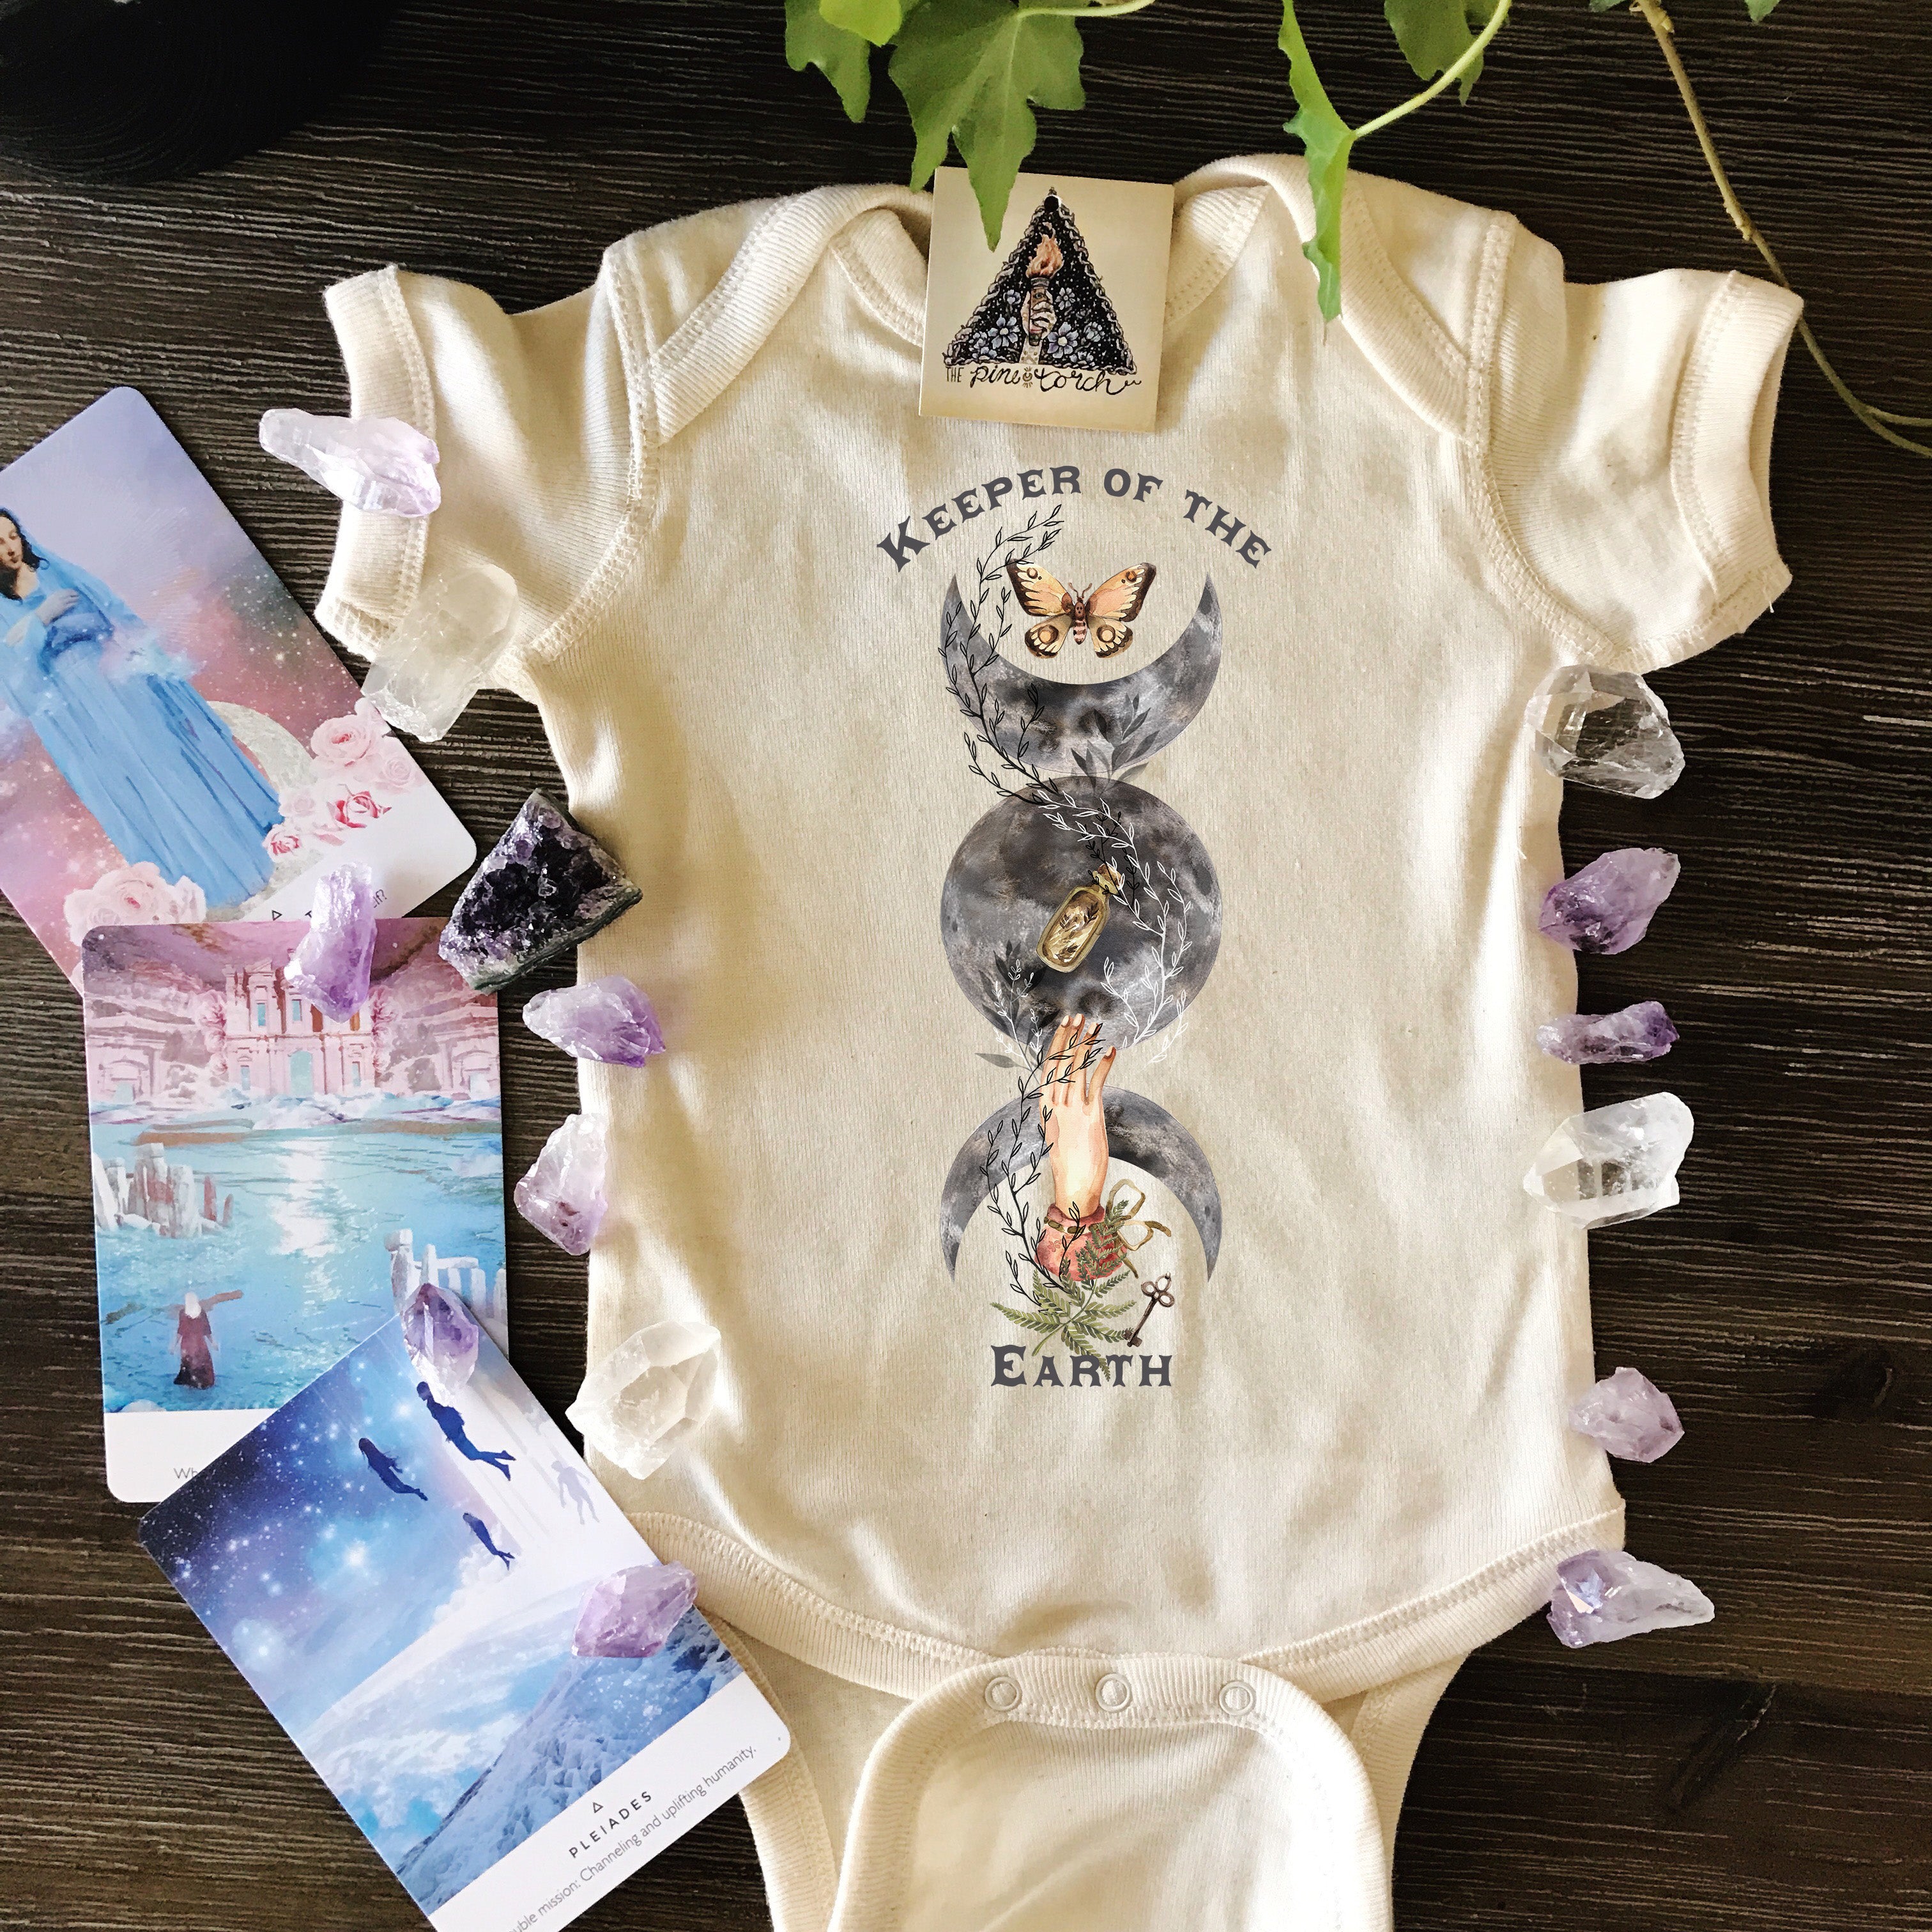 « KEEPER OF THE EARTH » BODYSUIT